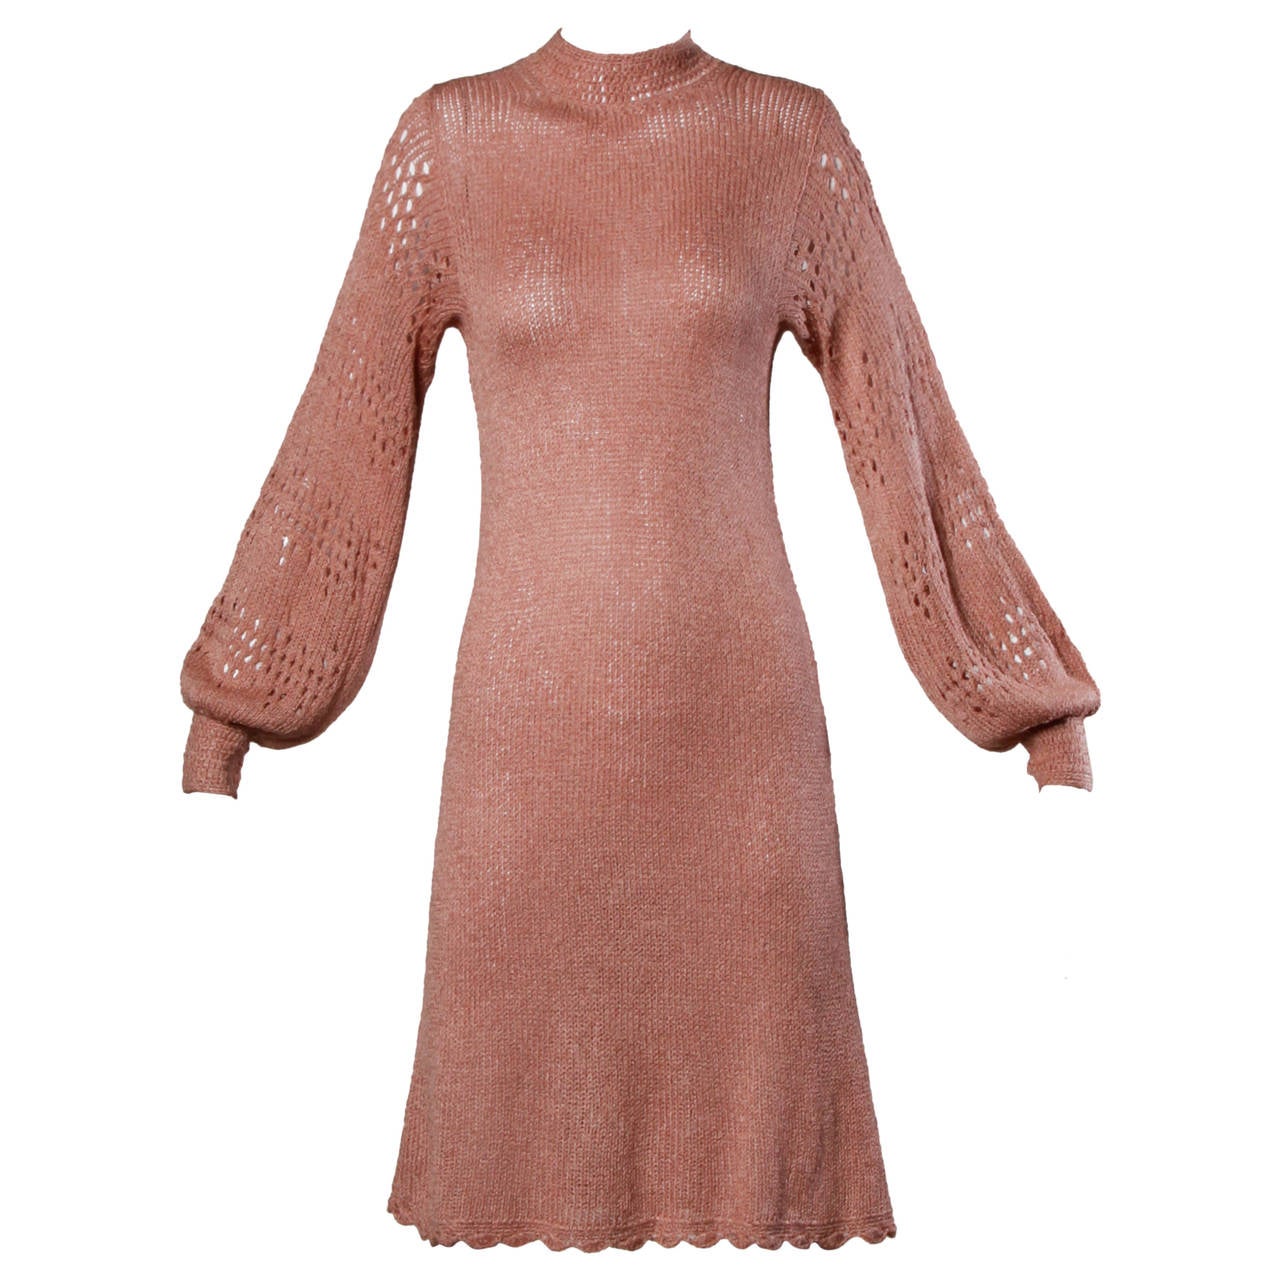 1970s Vintage Hand-Knit Dress with Billowy Sleeves